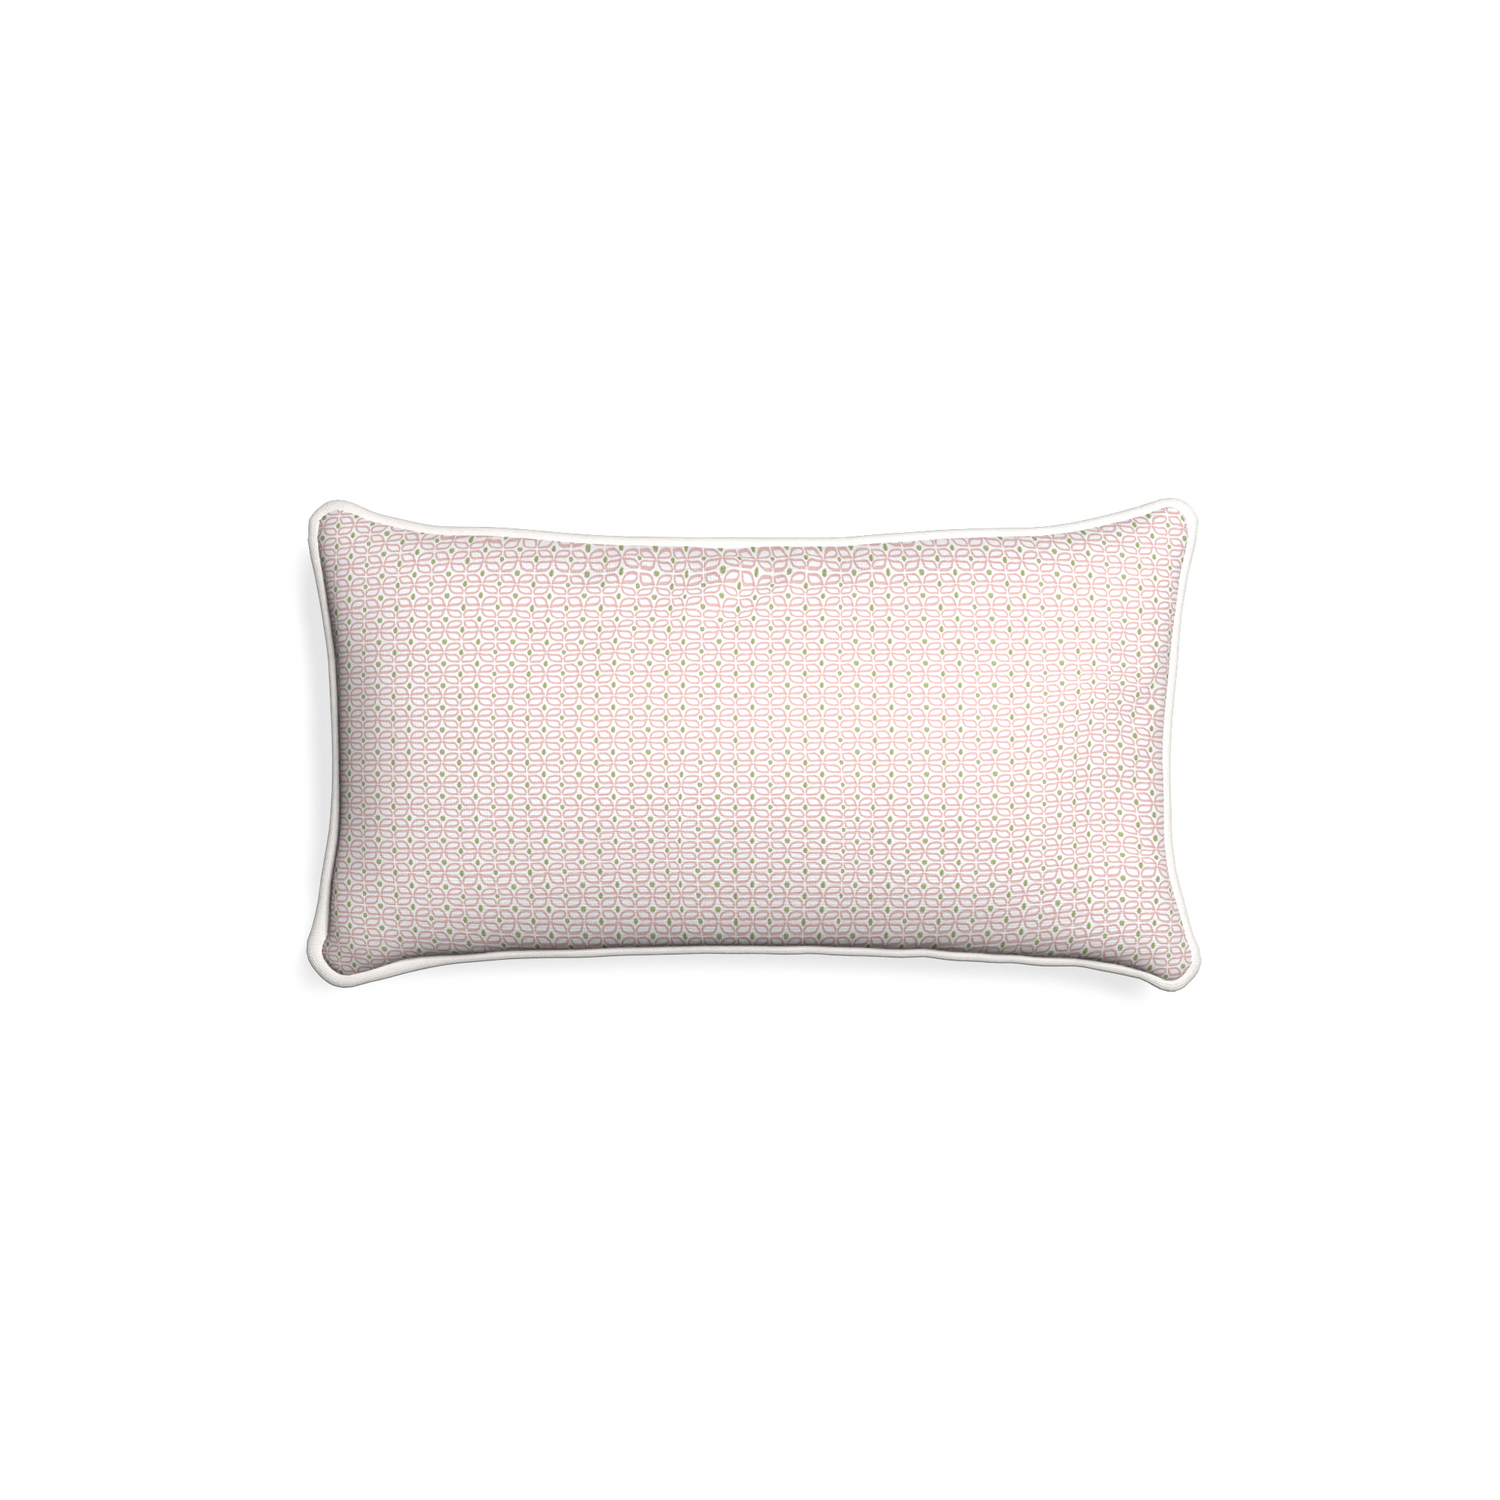 Petite-lumbar loomi pink custom pink geometricpillow with snow piping on white background